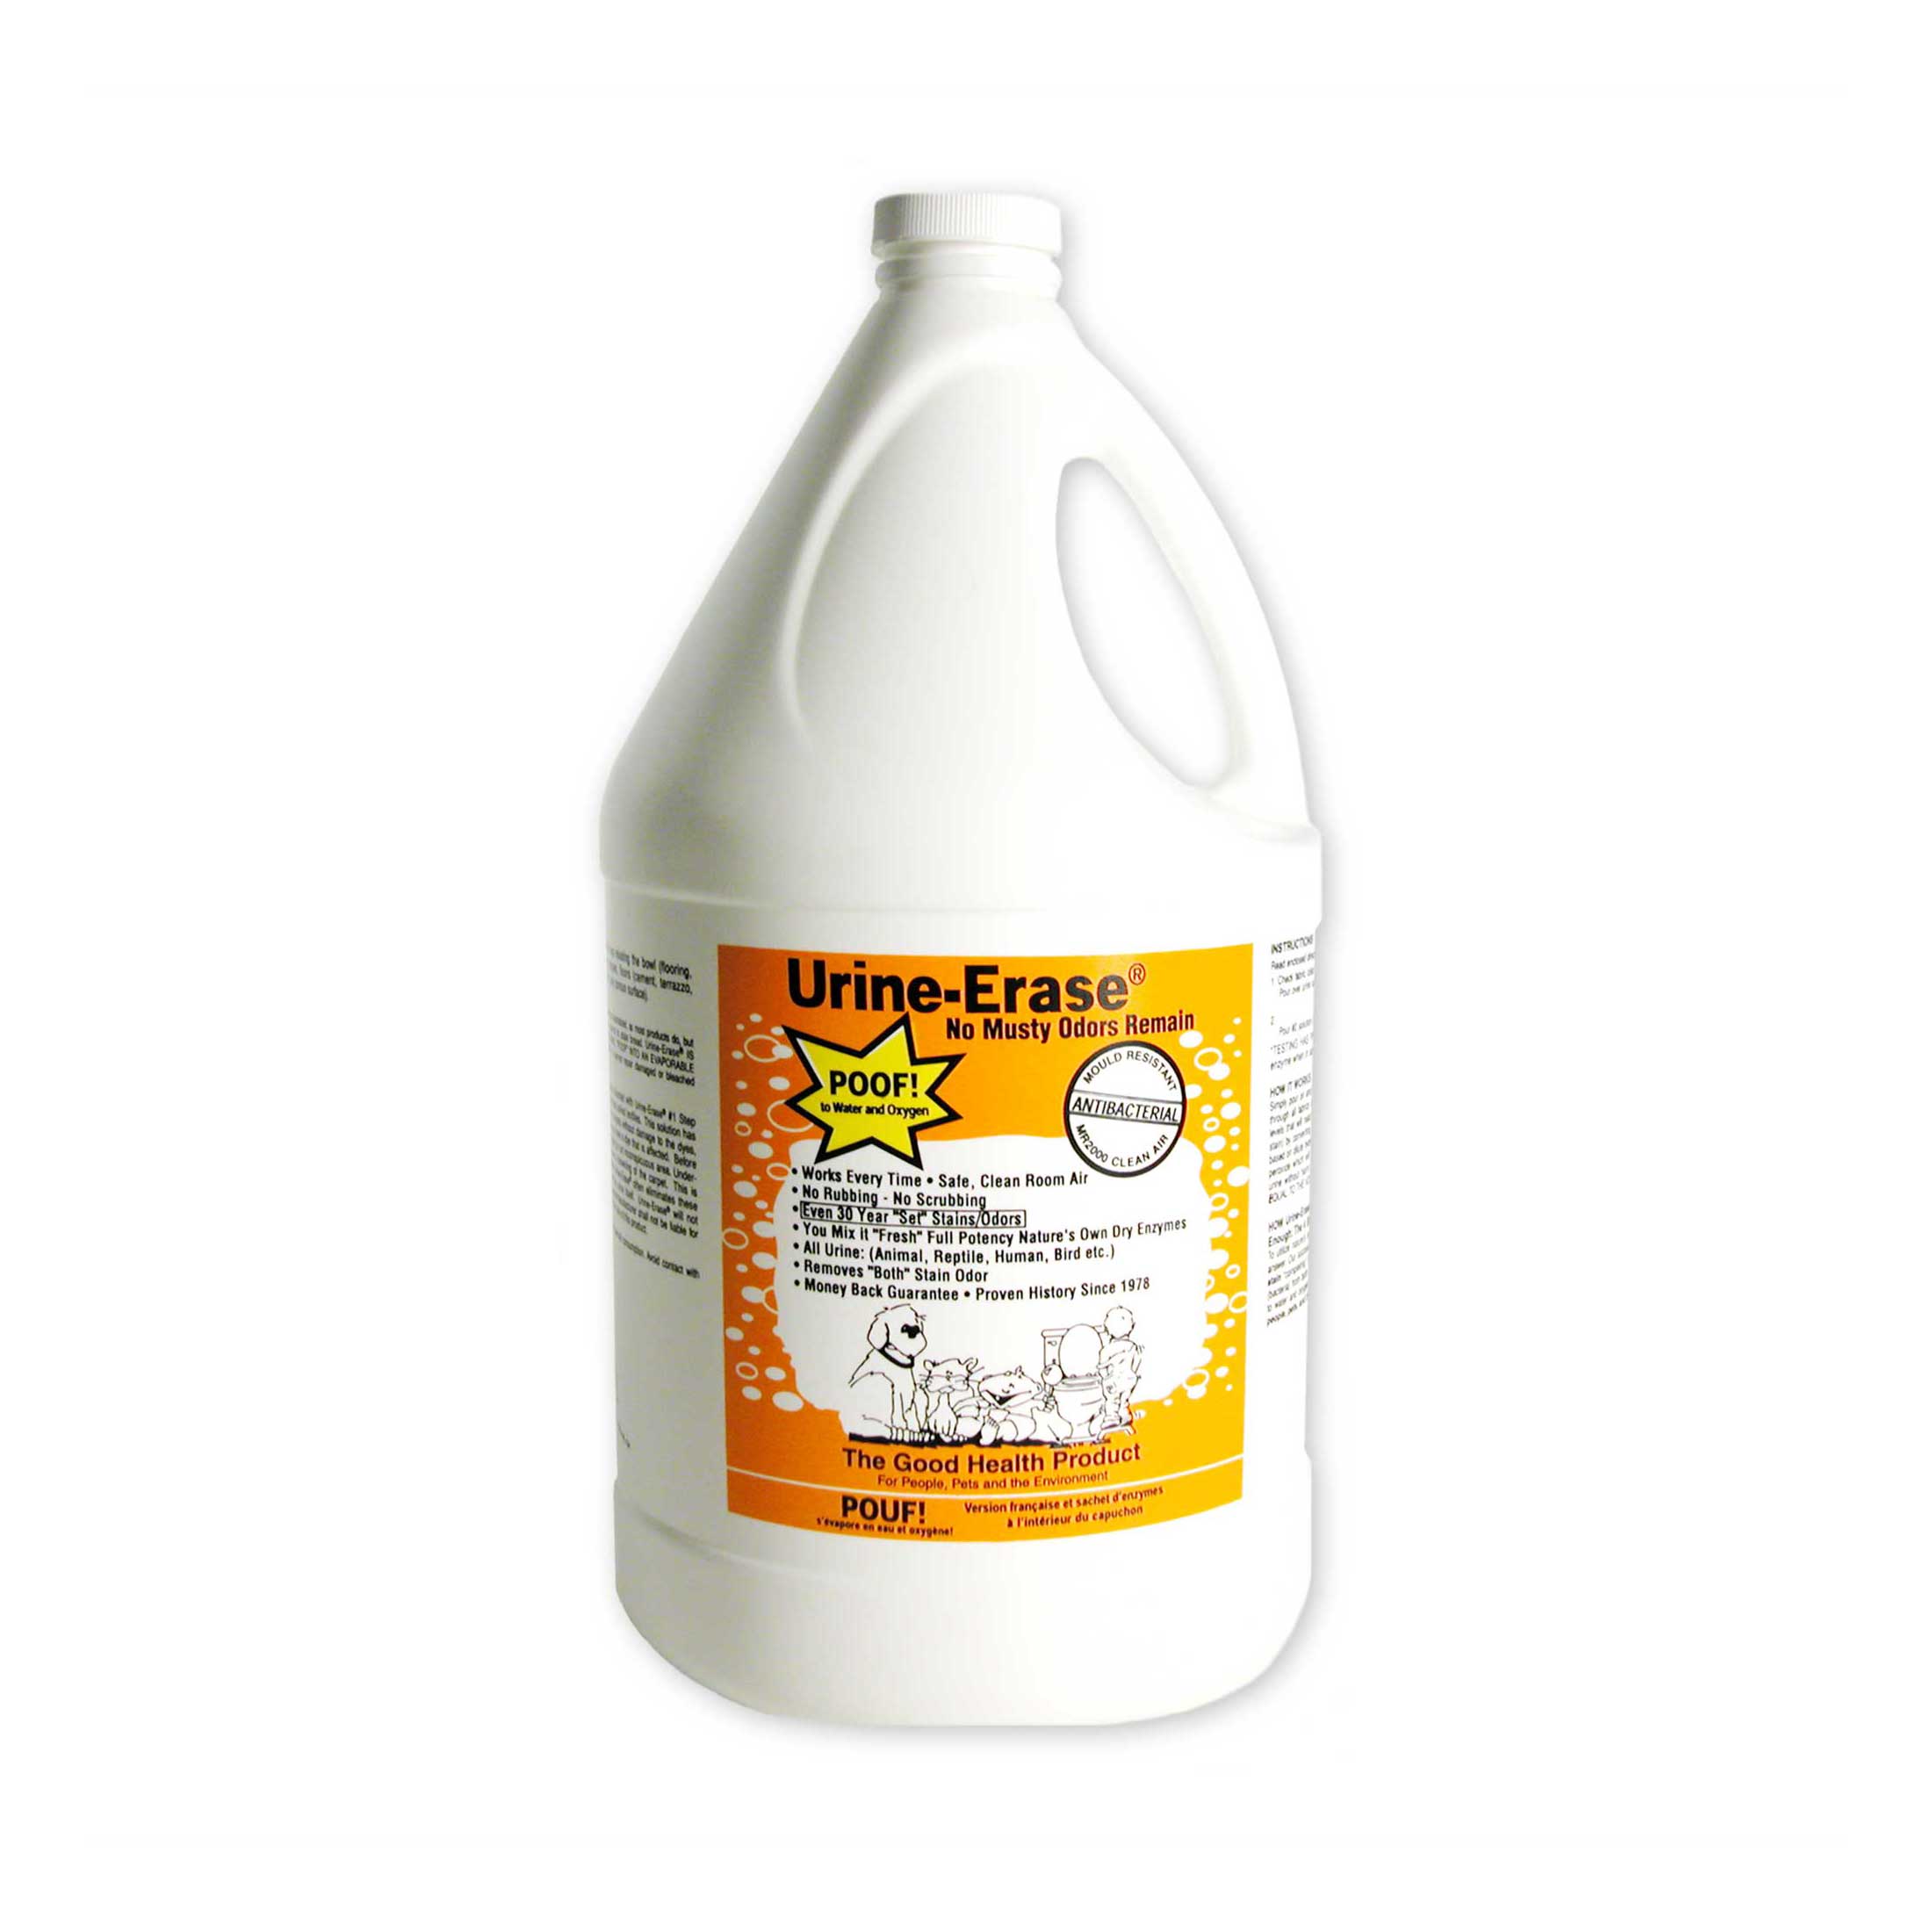 Urine-Erase Stain and Odor Remover: Bedwetting Store - Protective Bedding